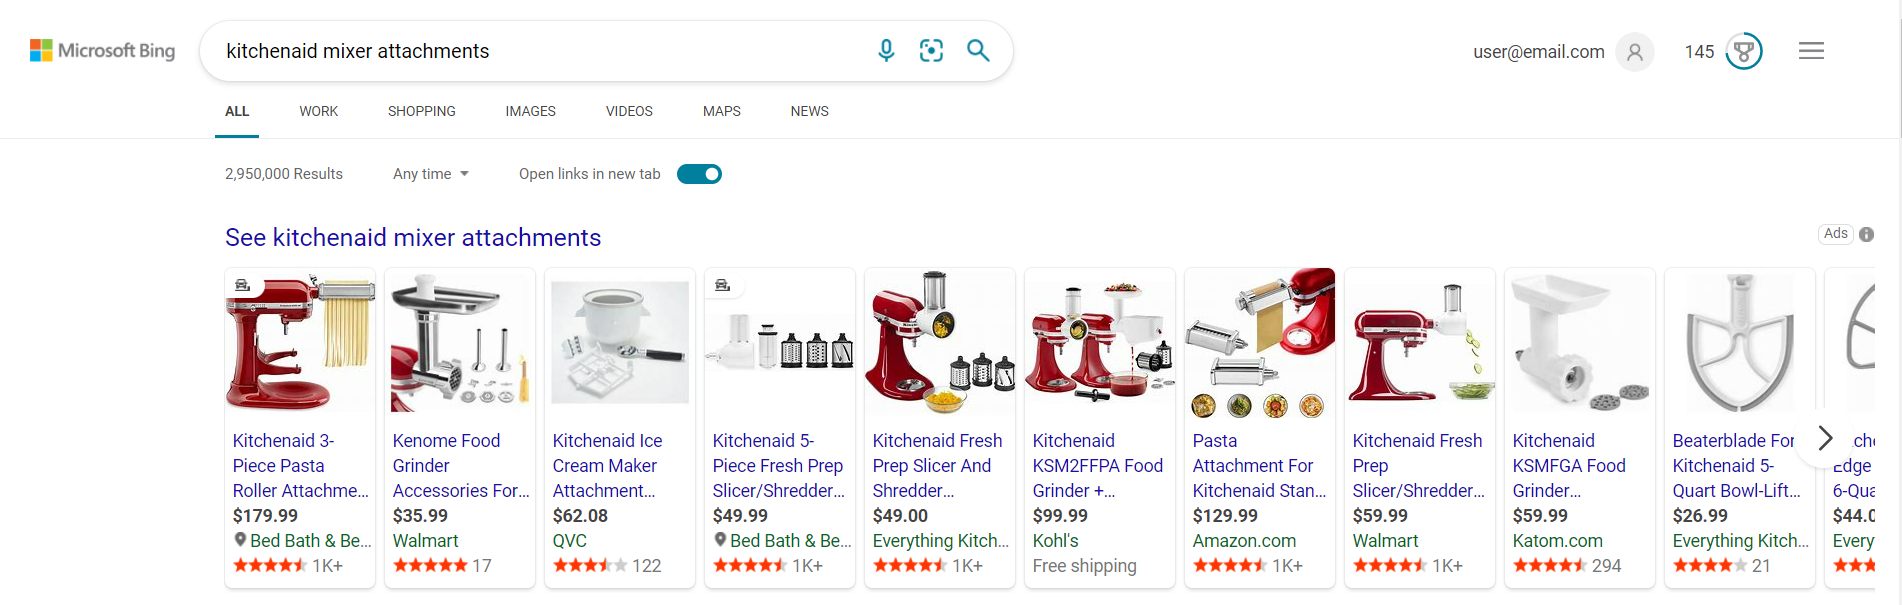 Microsoft Bing Shopping Ads Results Example